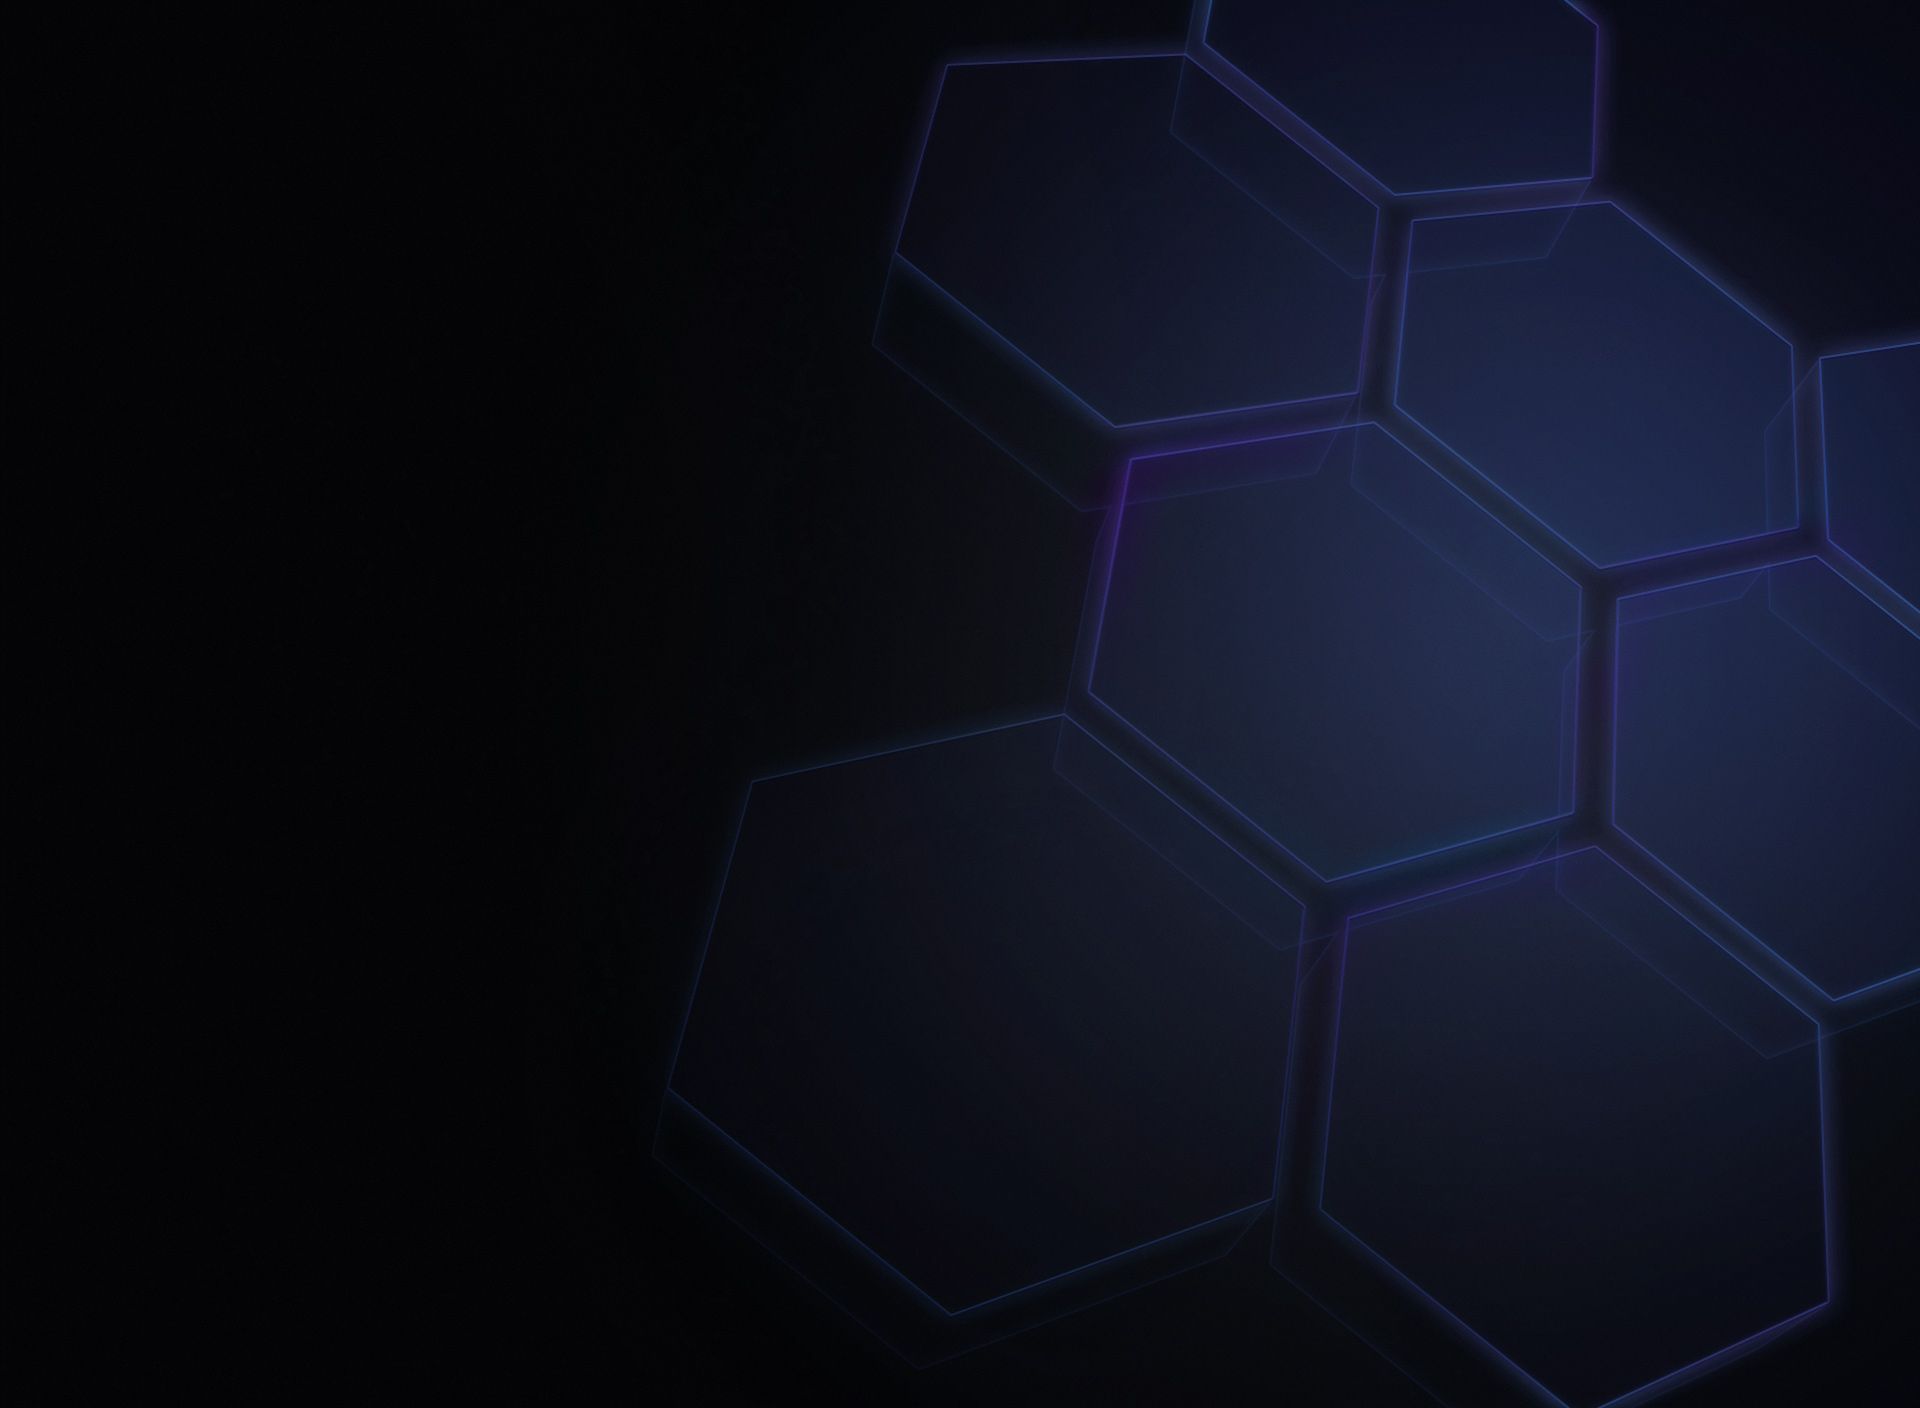 Glowy Hex Sony S wallpaper. Tablet wallpaper and background